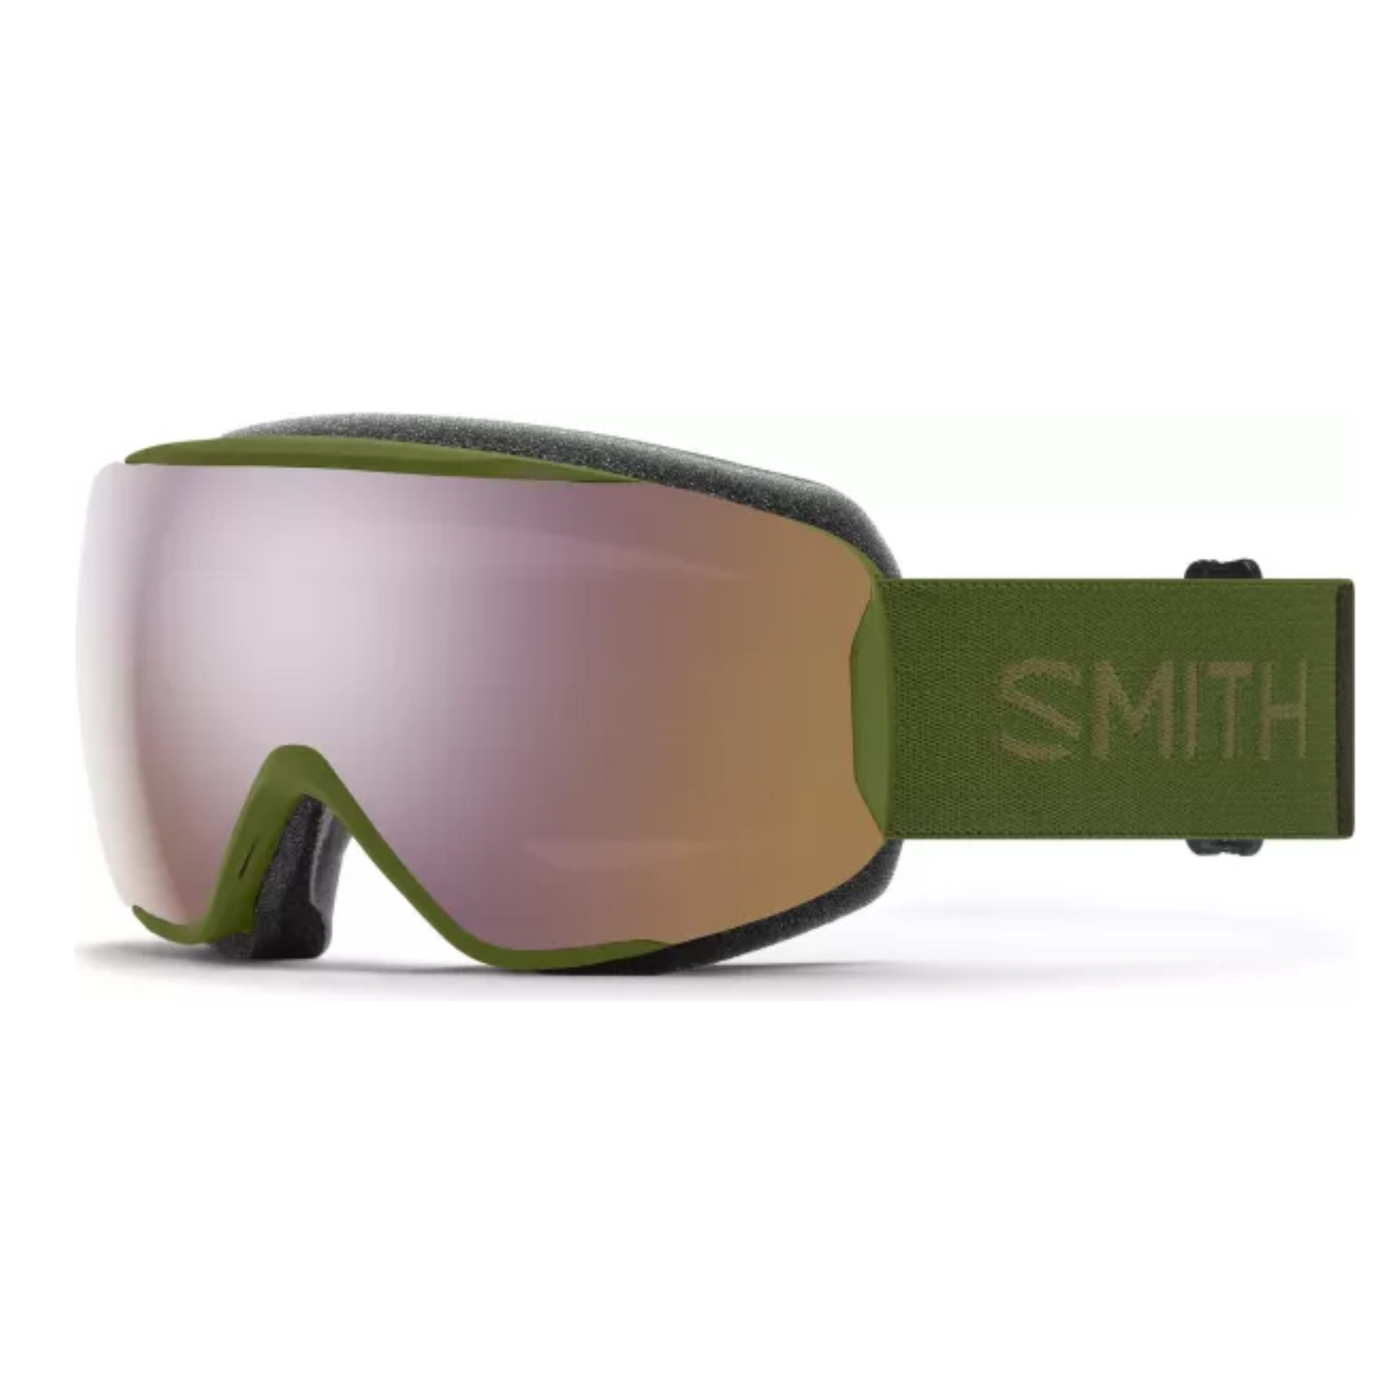 Smith Lunettes de ski Moment olive 22 everyday rose gold mirror